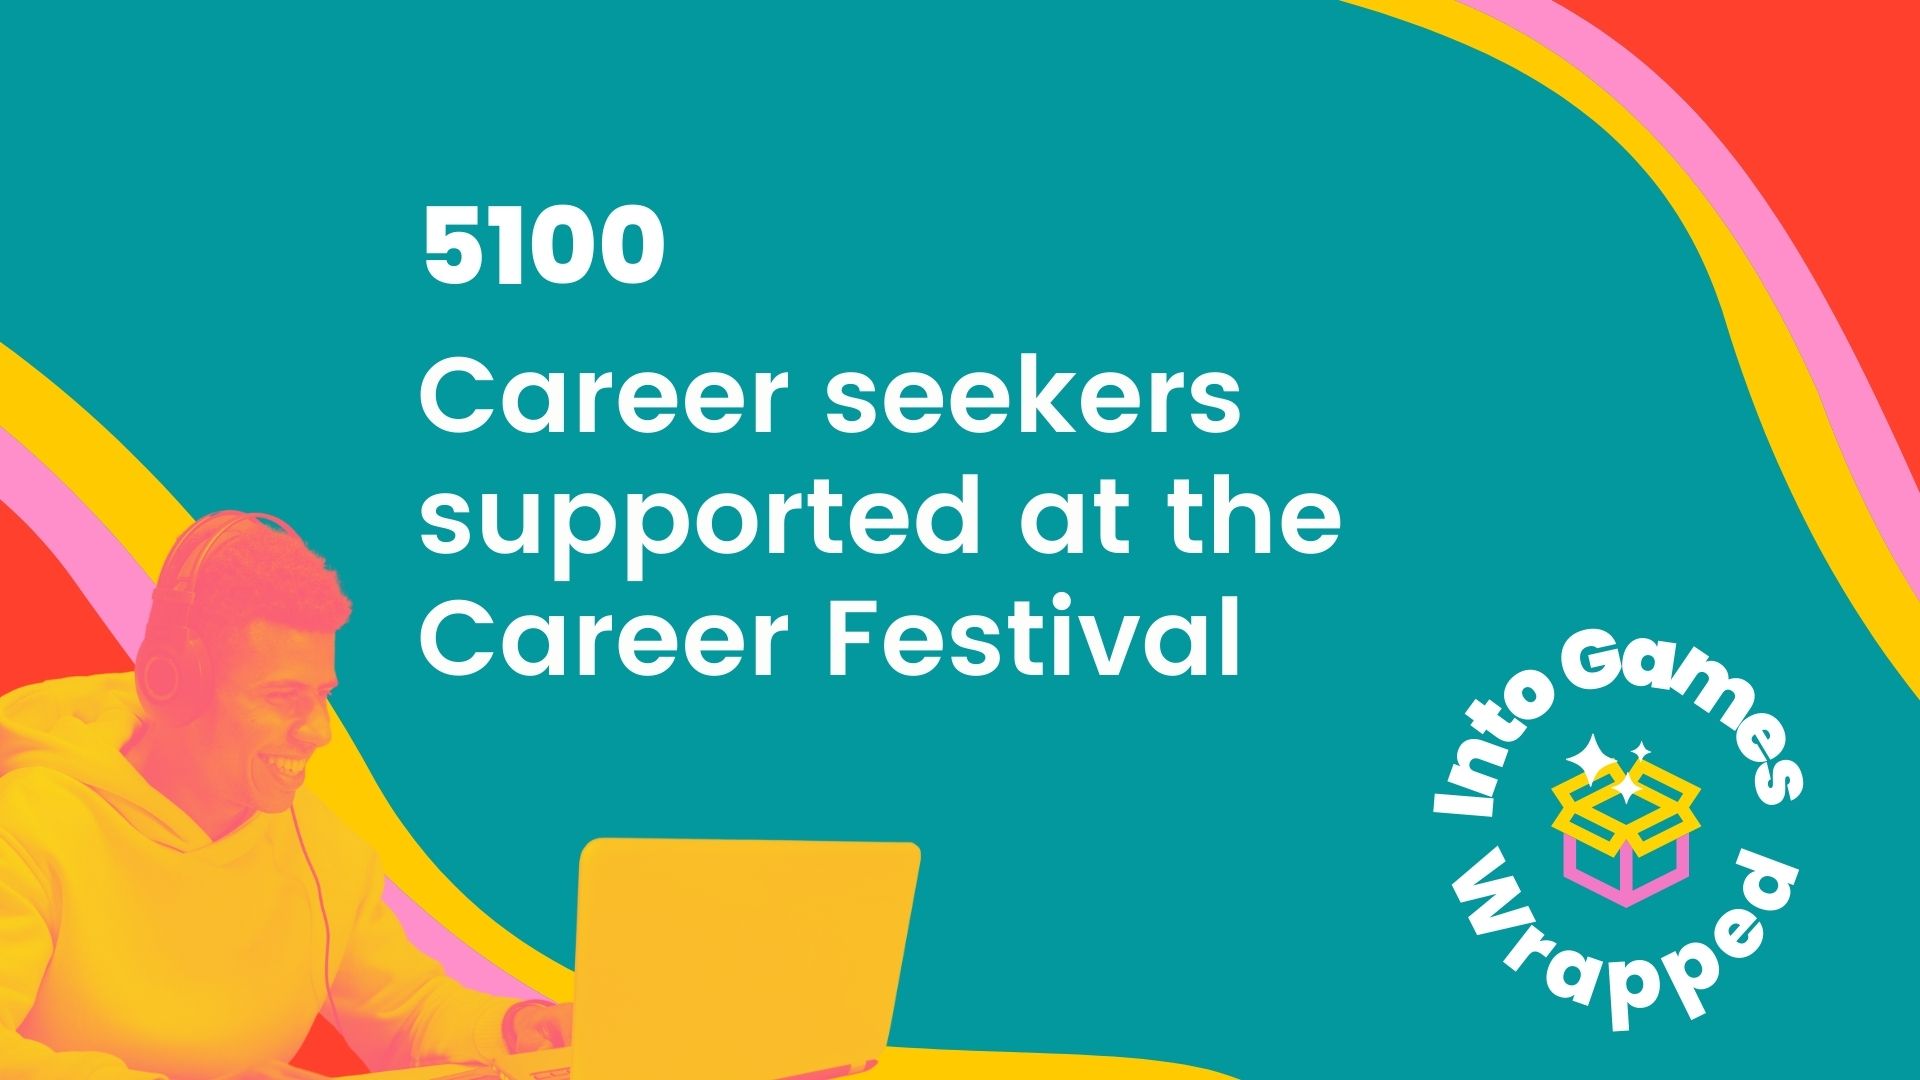 how many career seekers studio gobo supported 